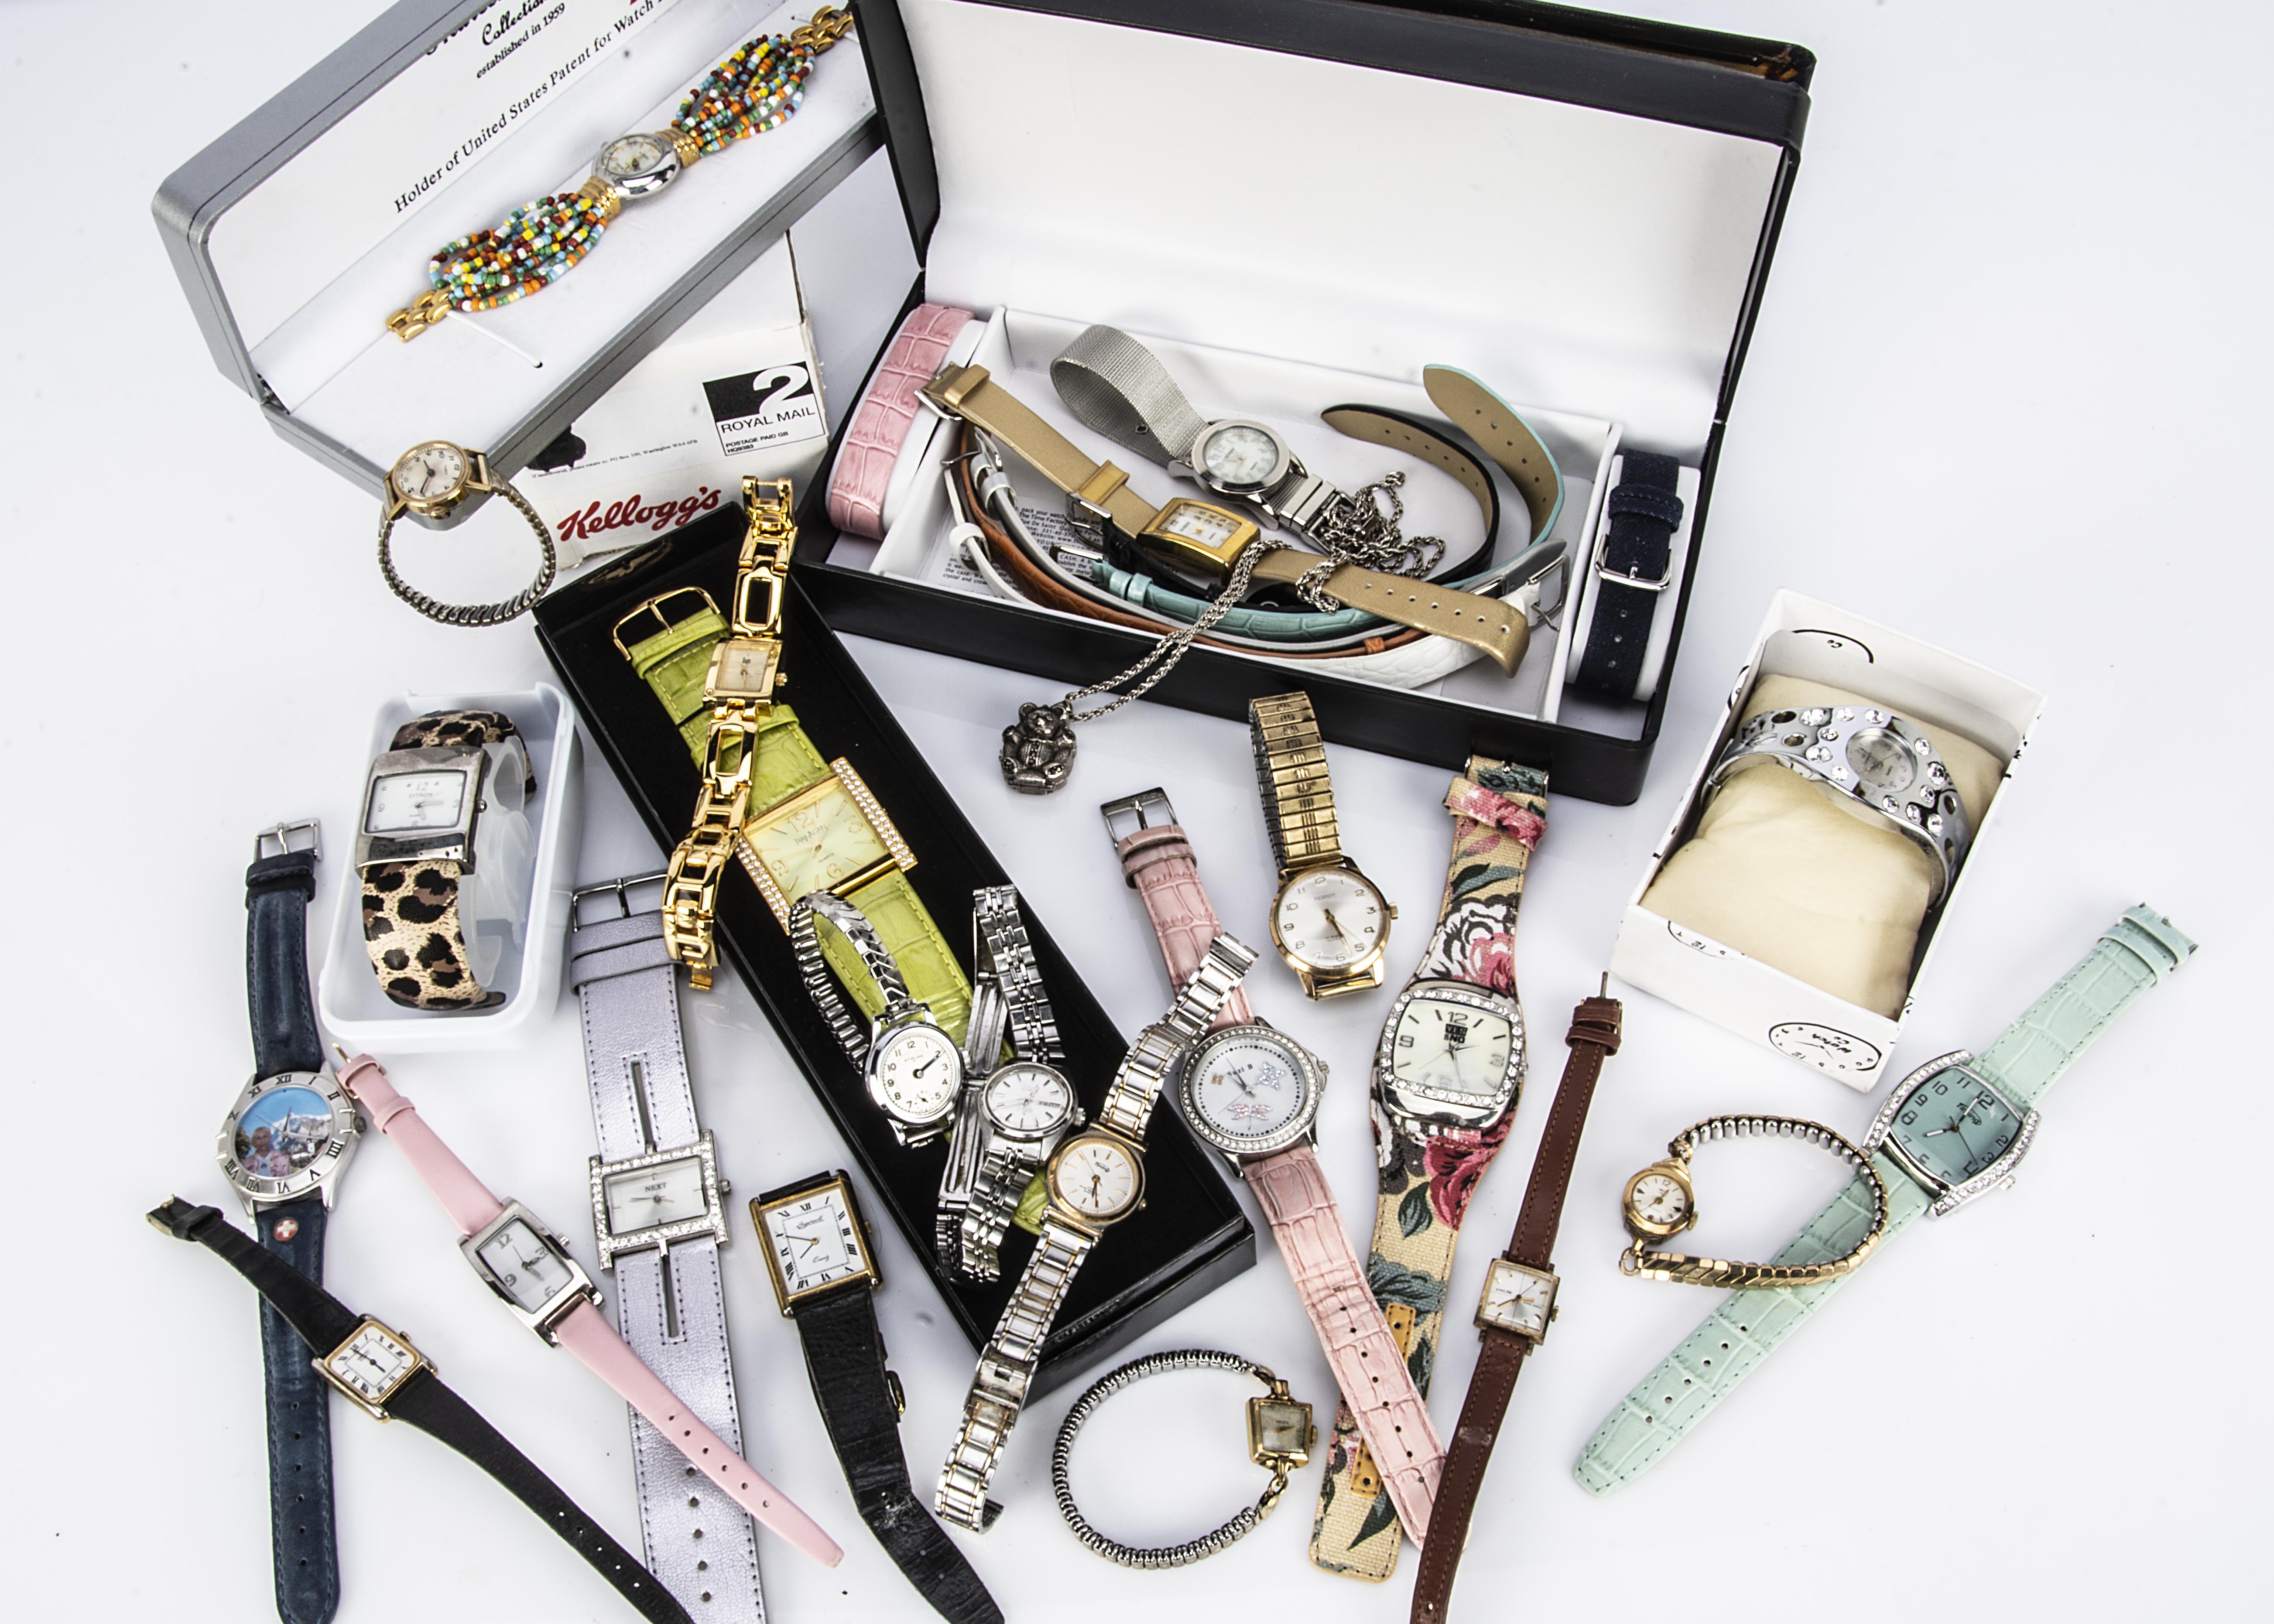 A collection of watches, including a cute silver Teddy bear pendant watch on chain, a Seiko